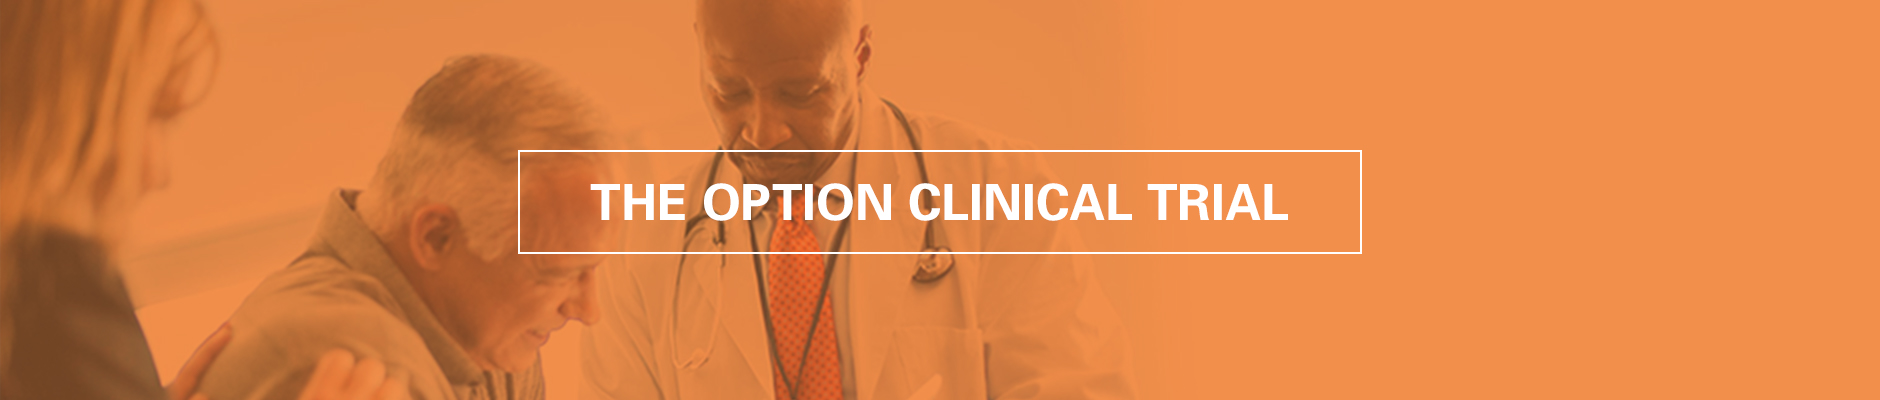 OPTION Clinical Trial Guidelines